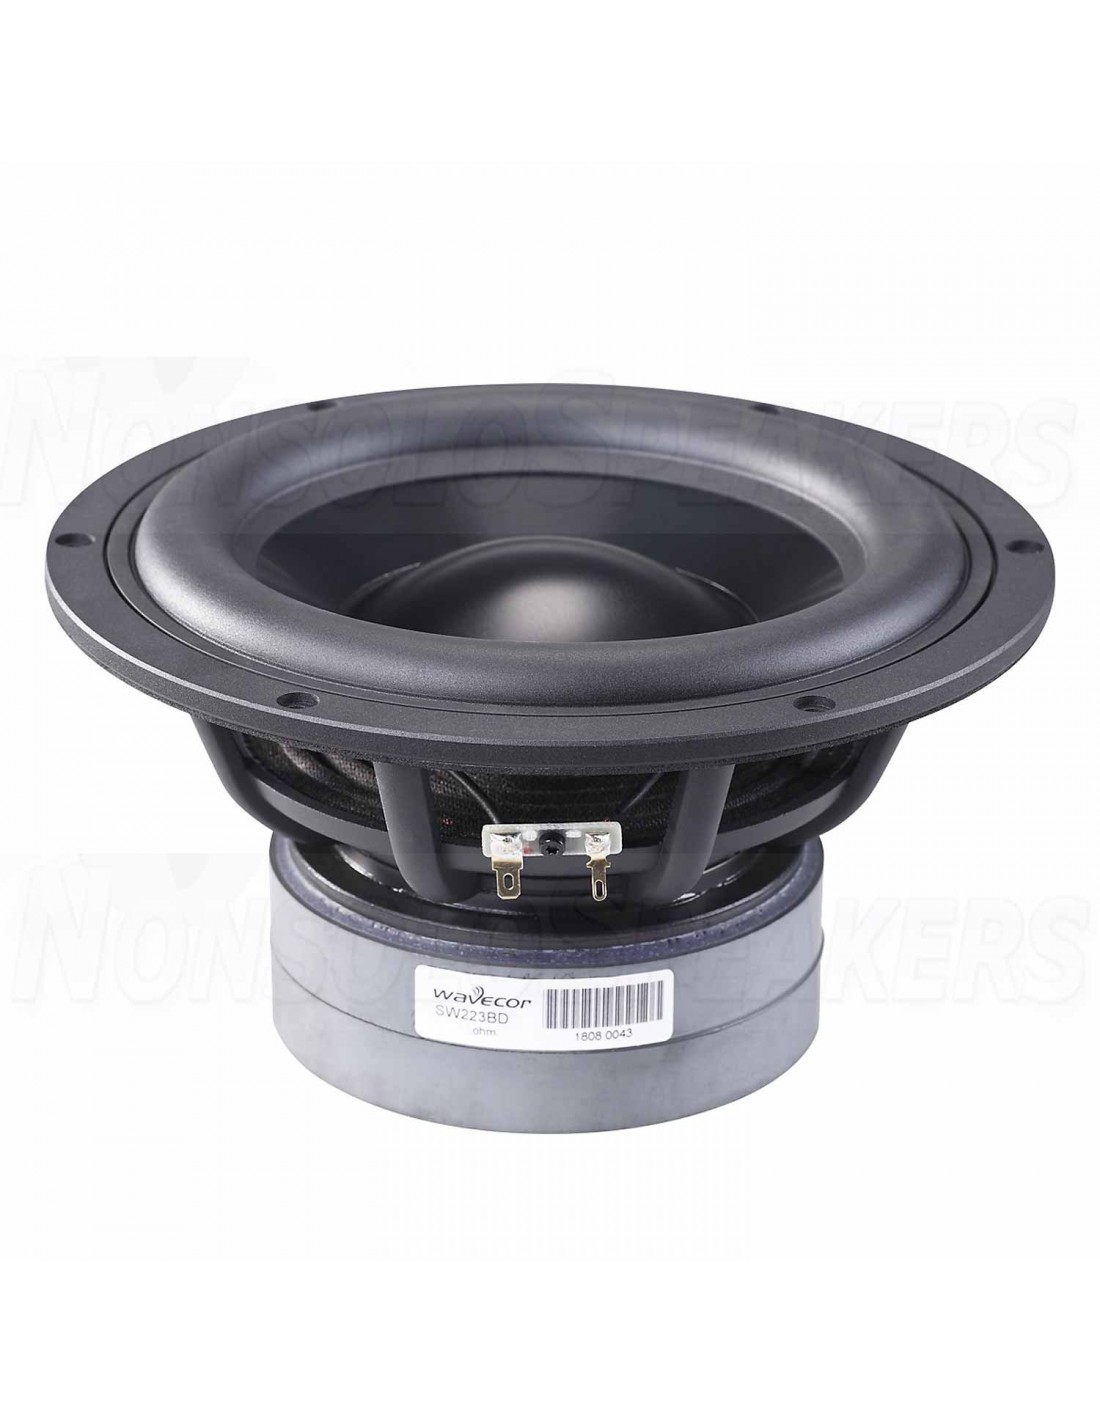 5" Extended Range Woofer Speakers.Whizzer Dual Cone.Home Audio.8ohm.PAIR 2 NEW 